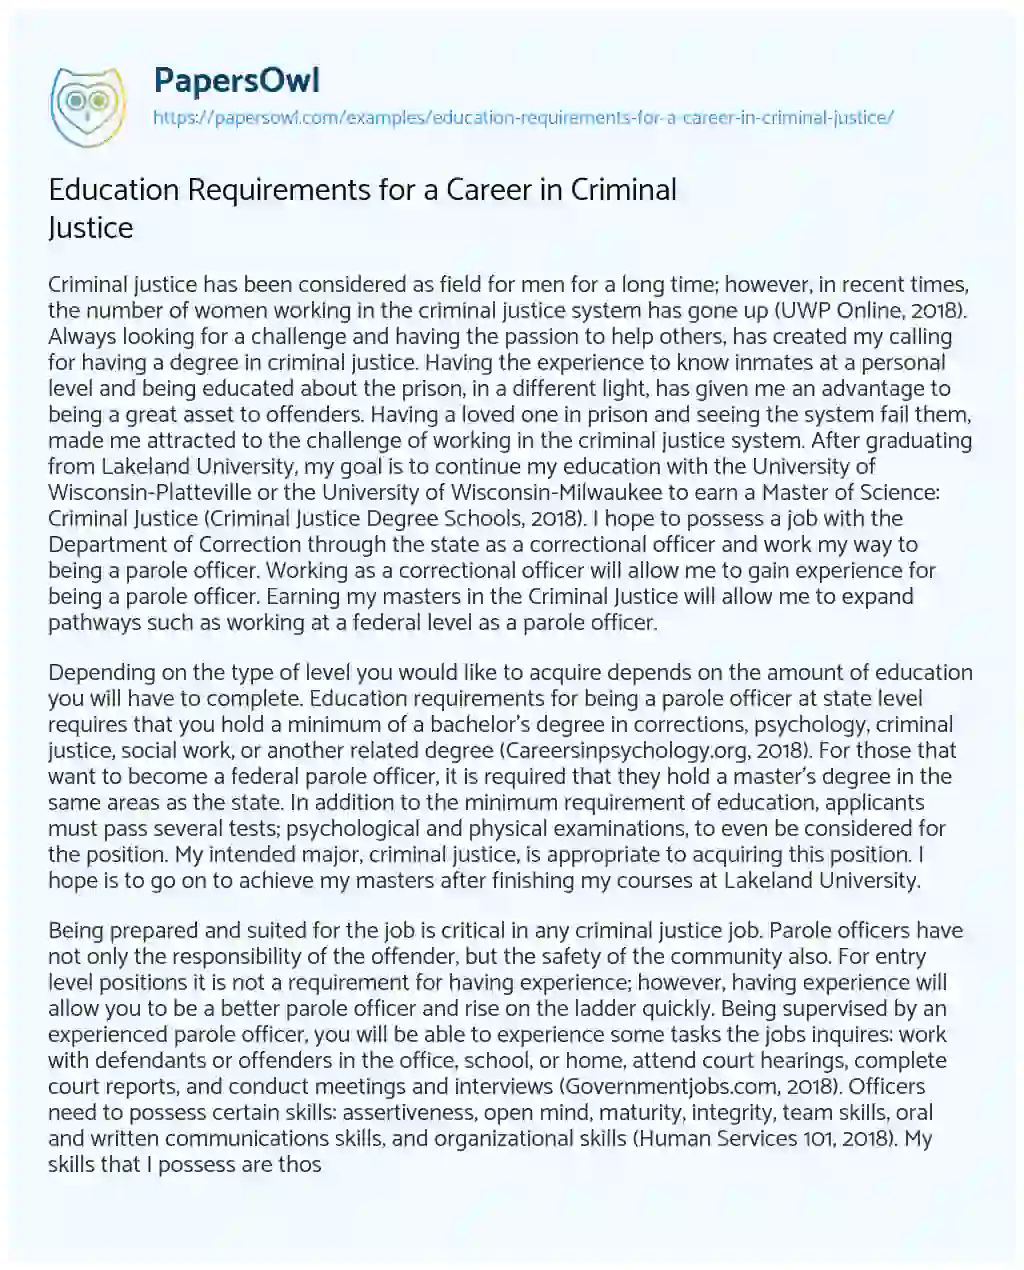 Essay on Education Requirements for a Career in Criminal Justice